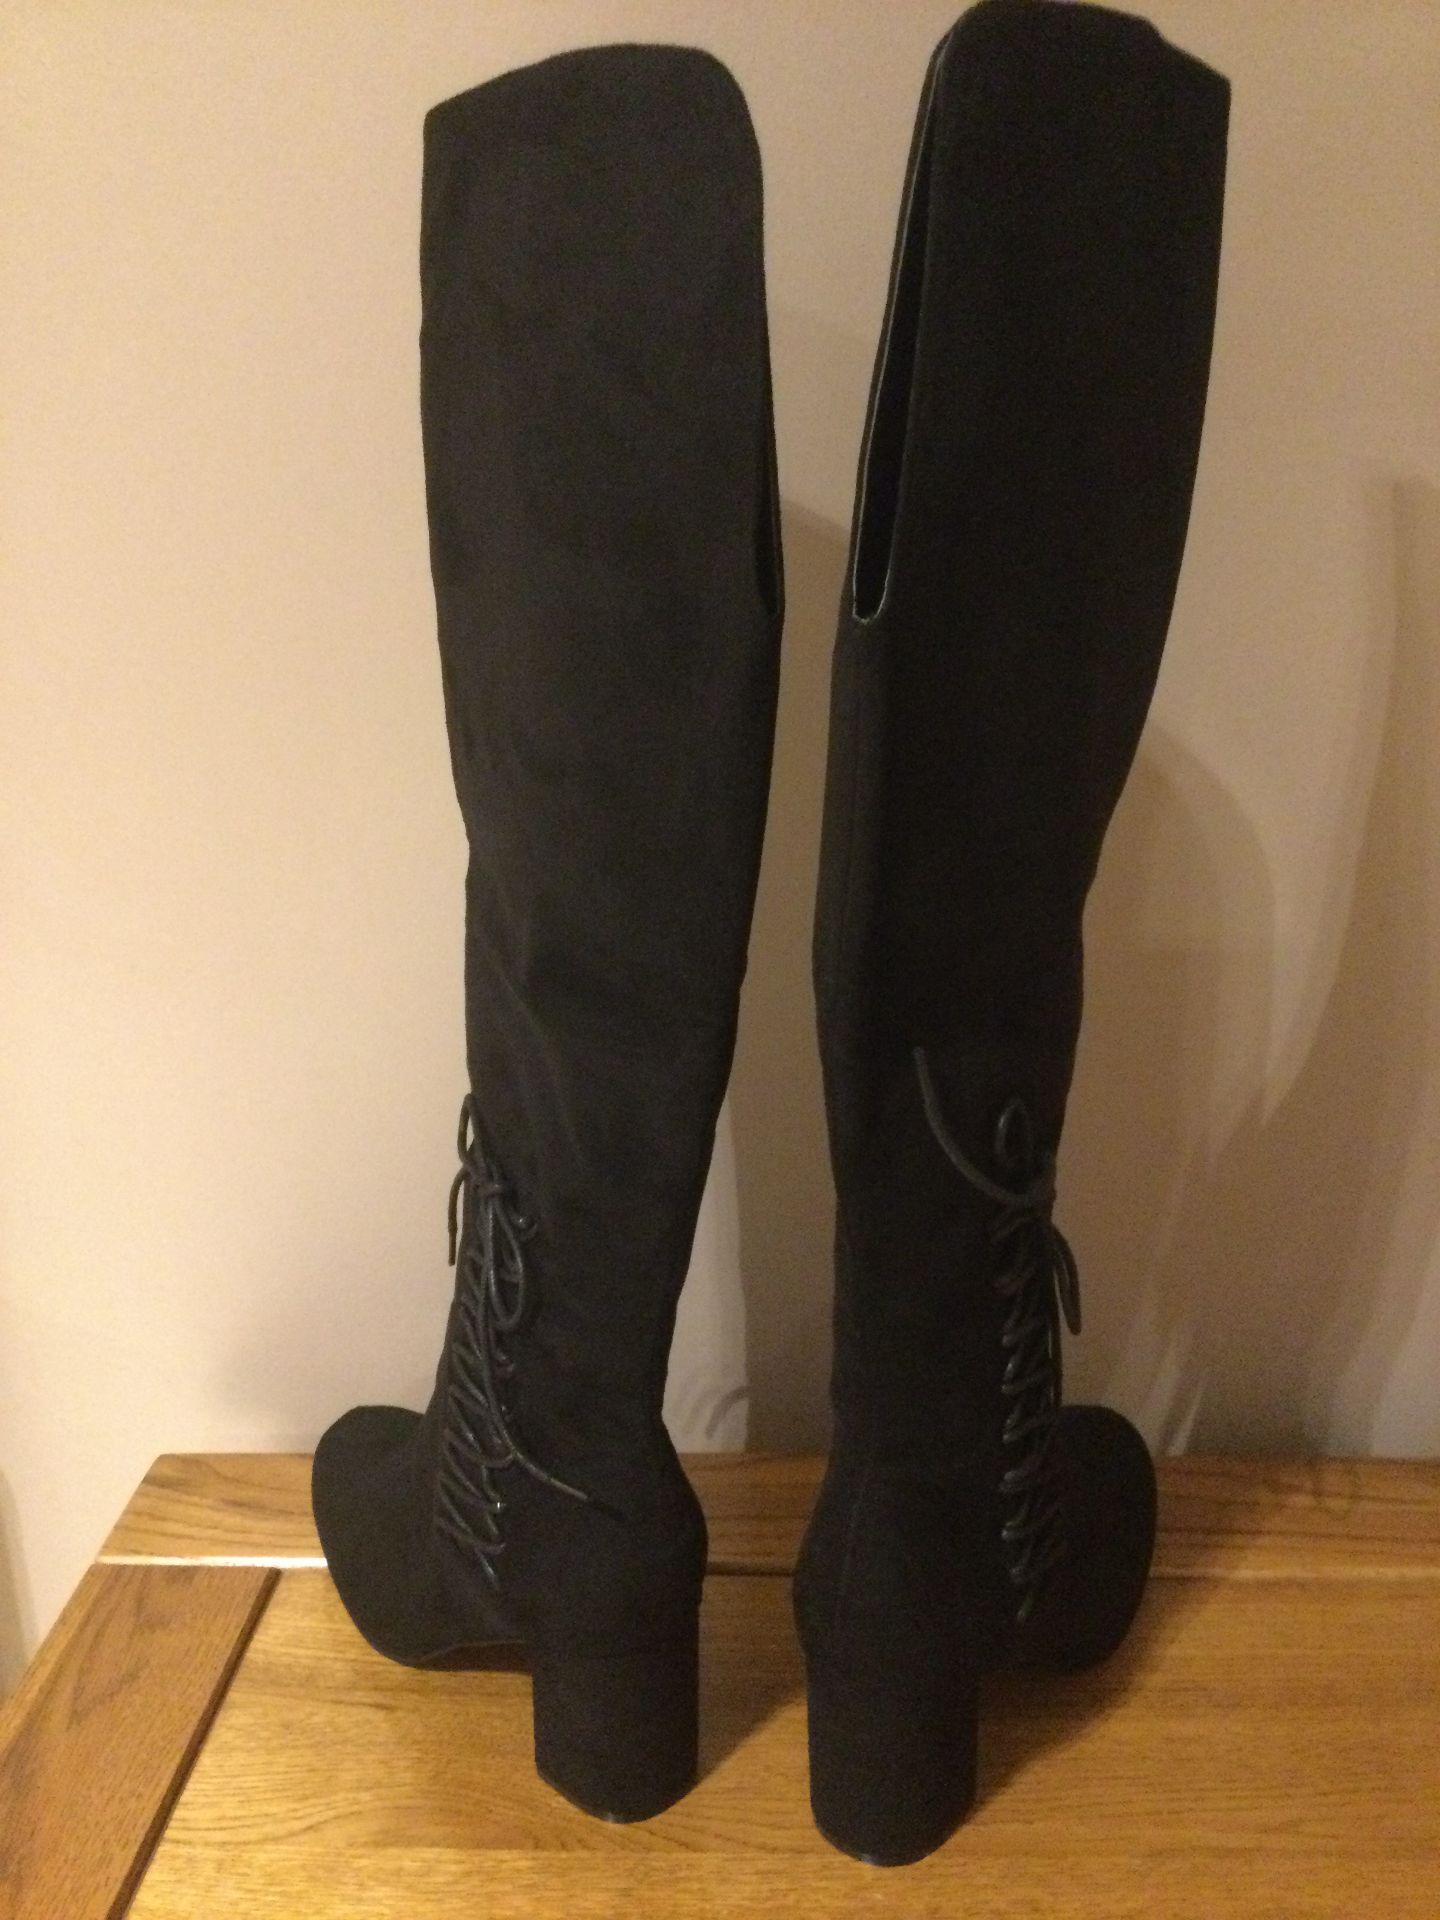 Dolcis “Emma” Long Boots, Block Heel, Size 6, Black - New RRP £55.00 - Image 5 of 7